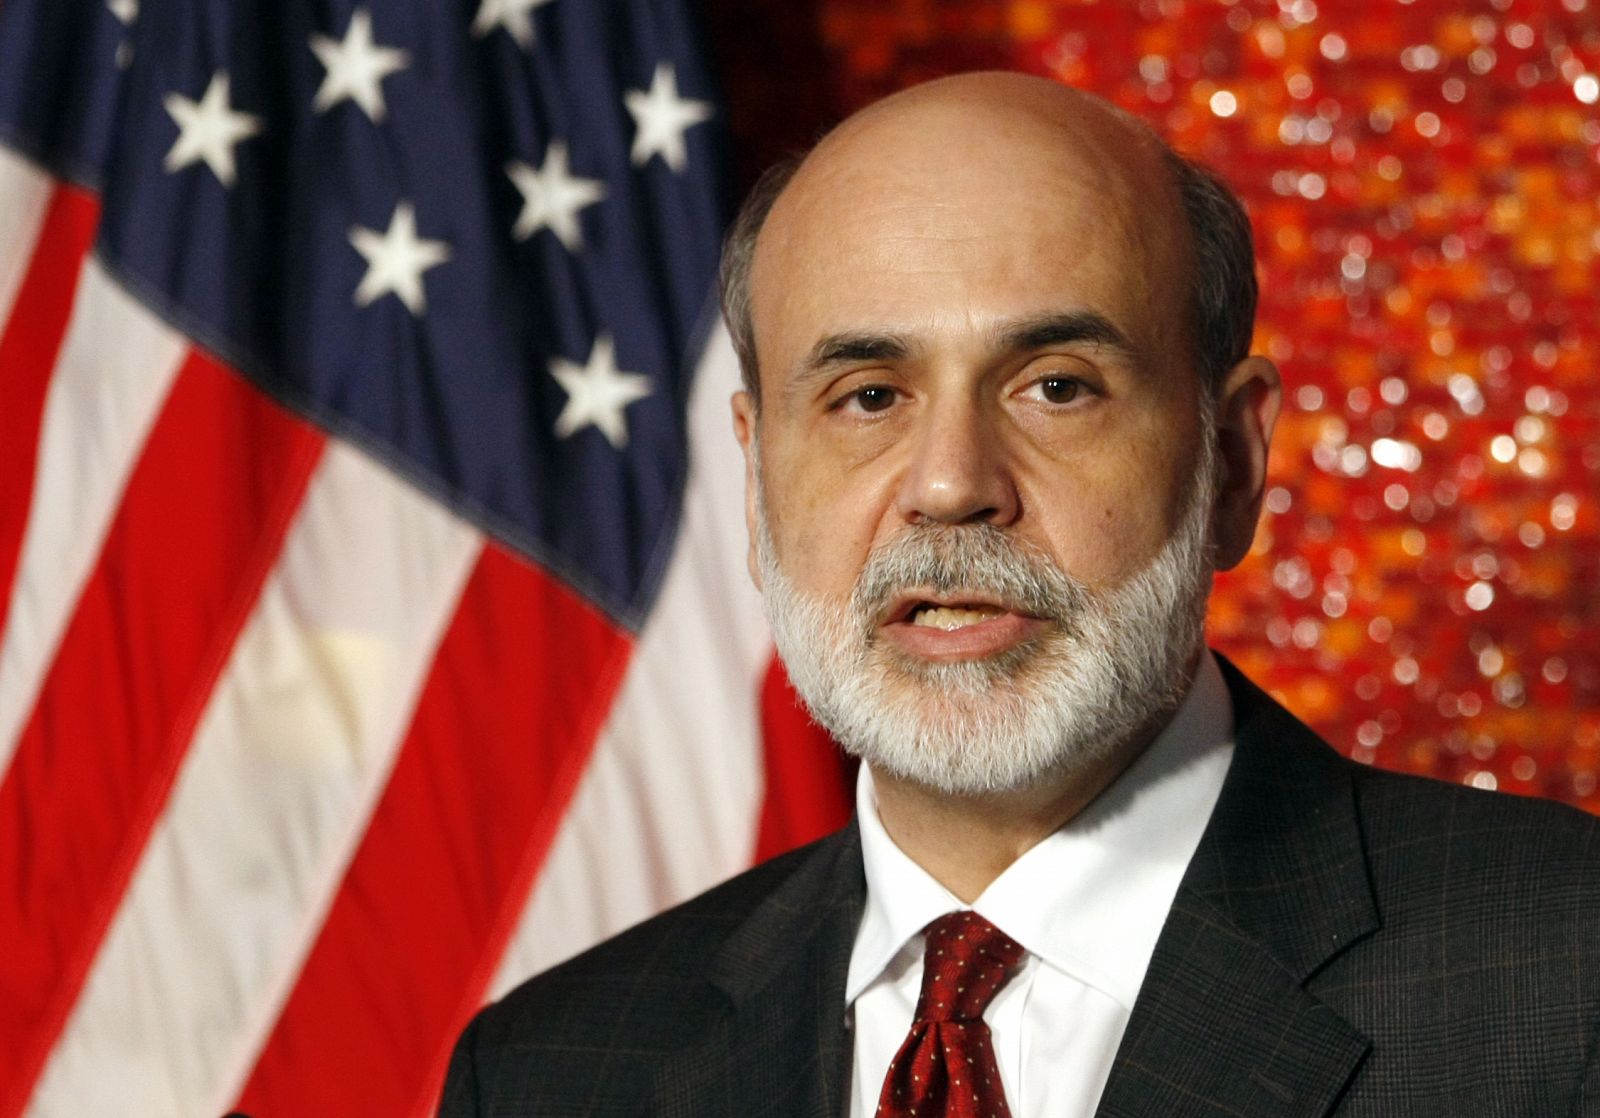 Chairman of the Federal Reserve Ben Bernanke speaks at the Federal Reserve Conference on Key Developments in Monetary Policy in Washington